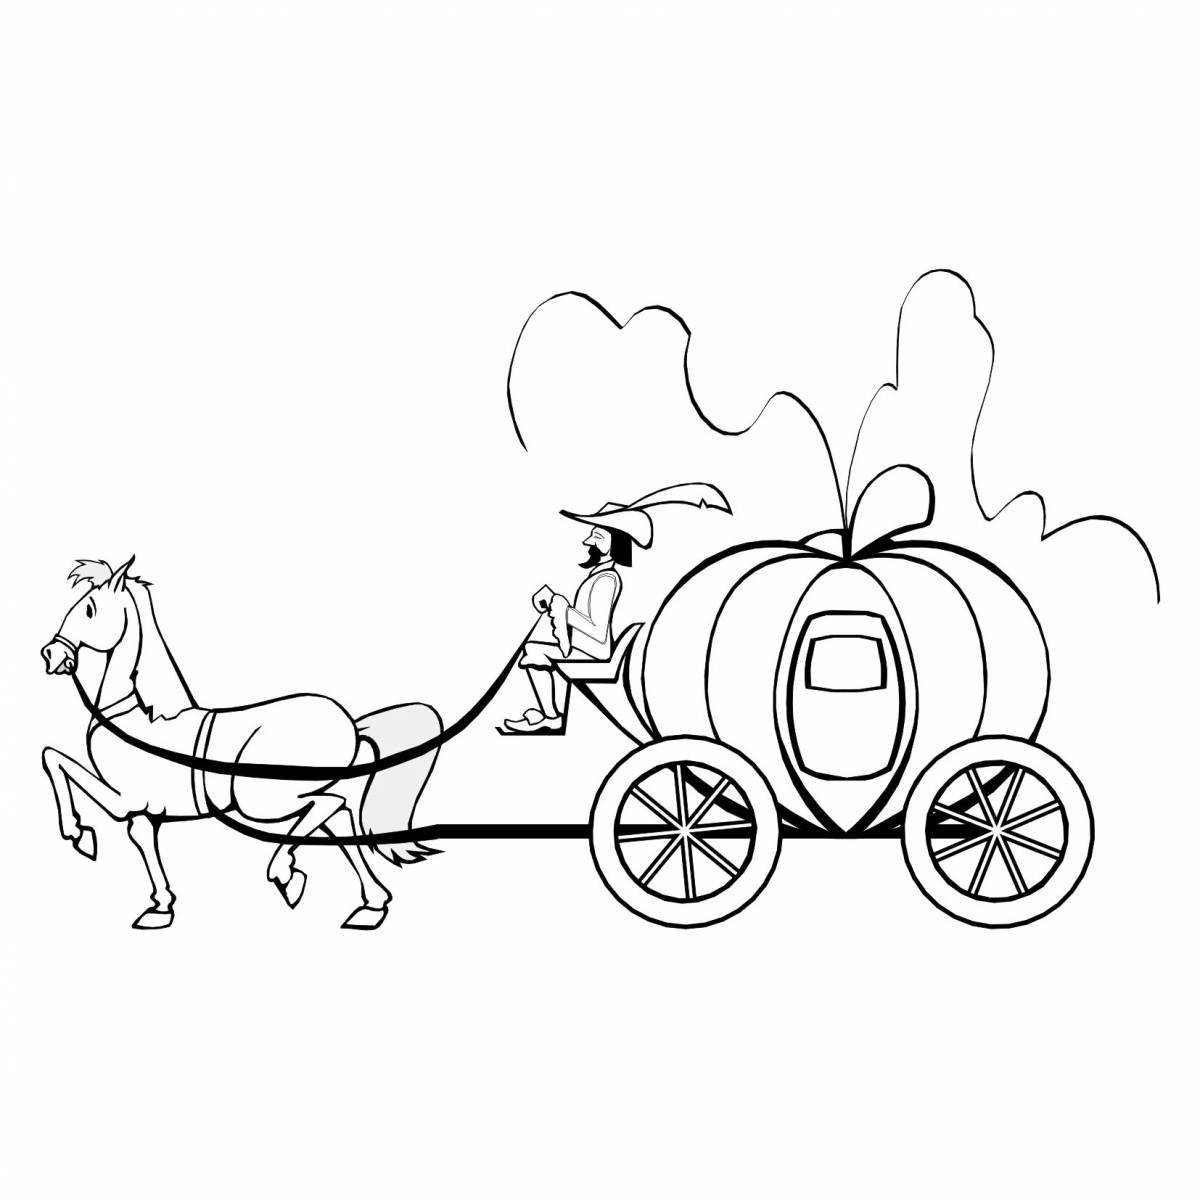 Coloring page shining horse carriage